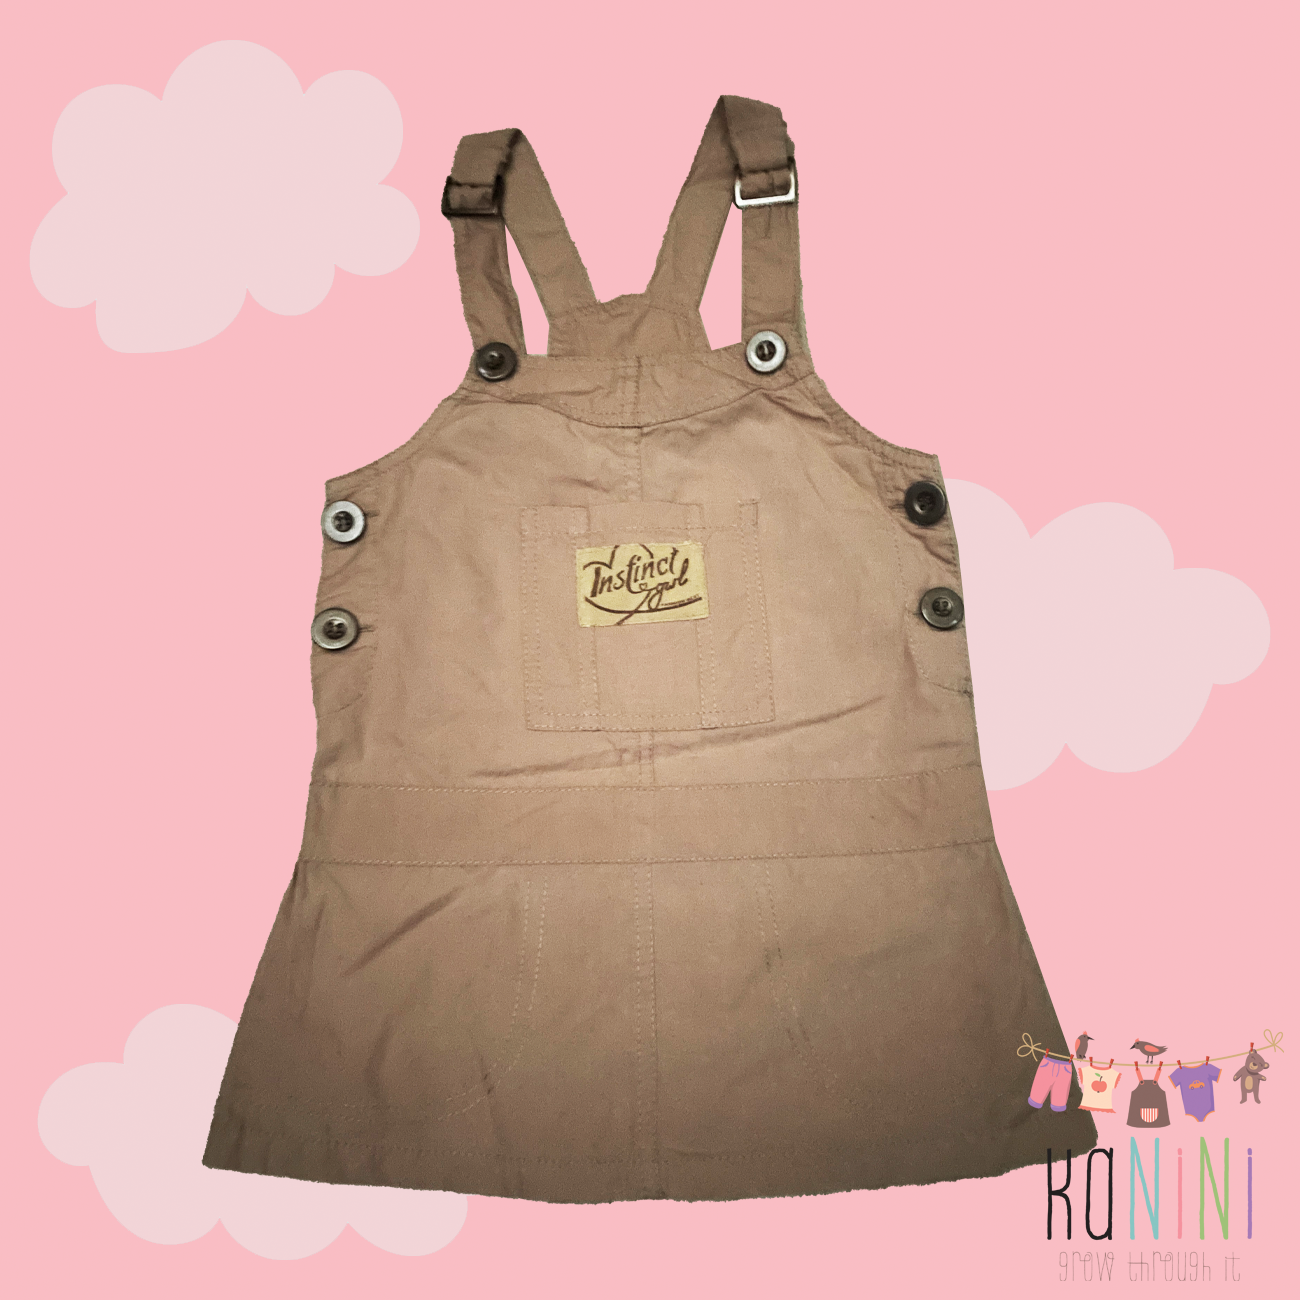 Featured image for “Instinct 2 - 3 Years Girls Dungaree Dress”